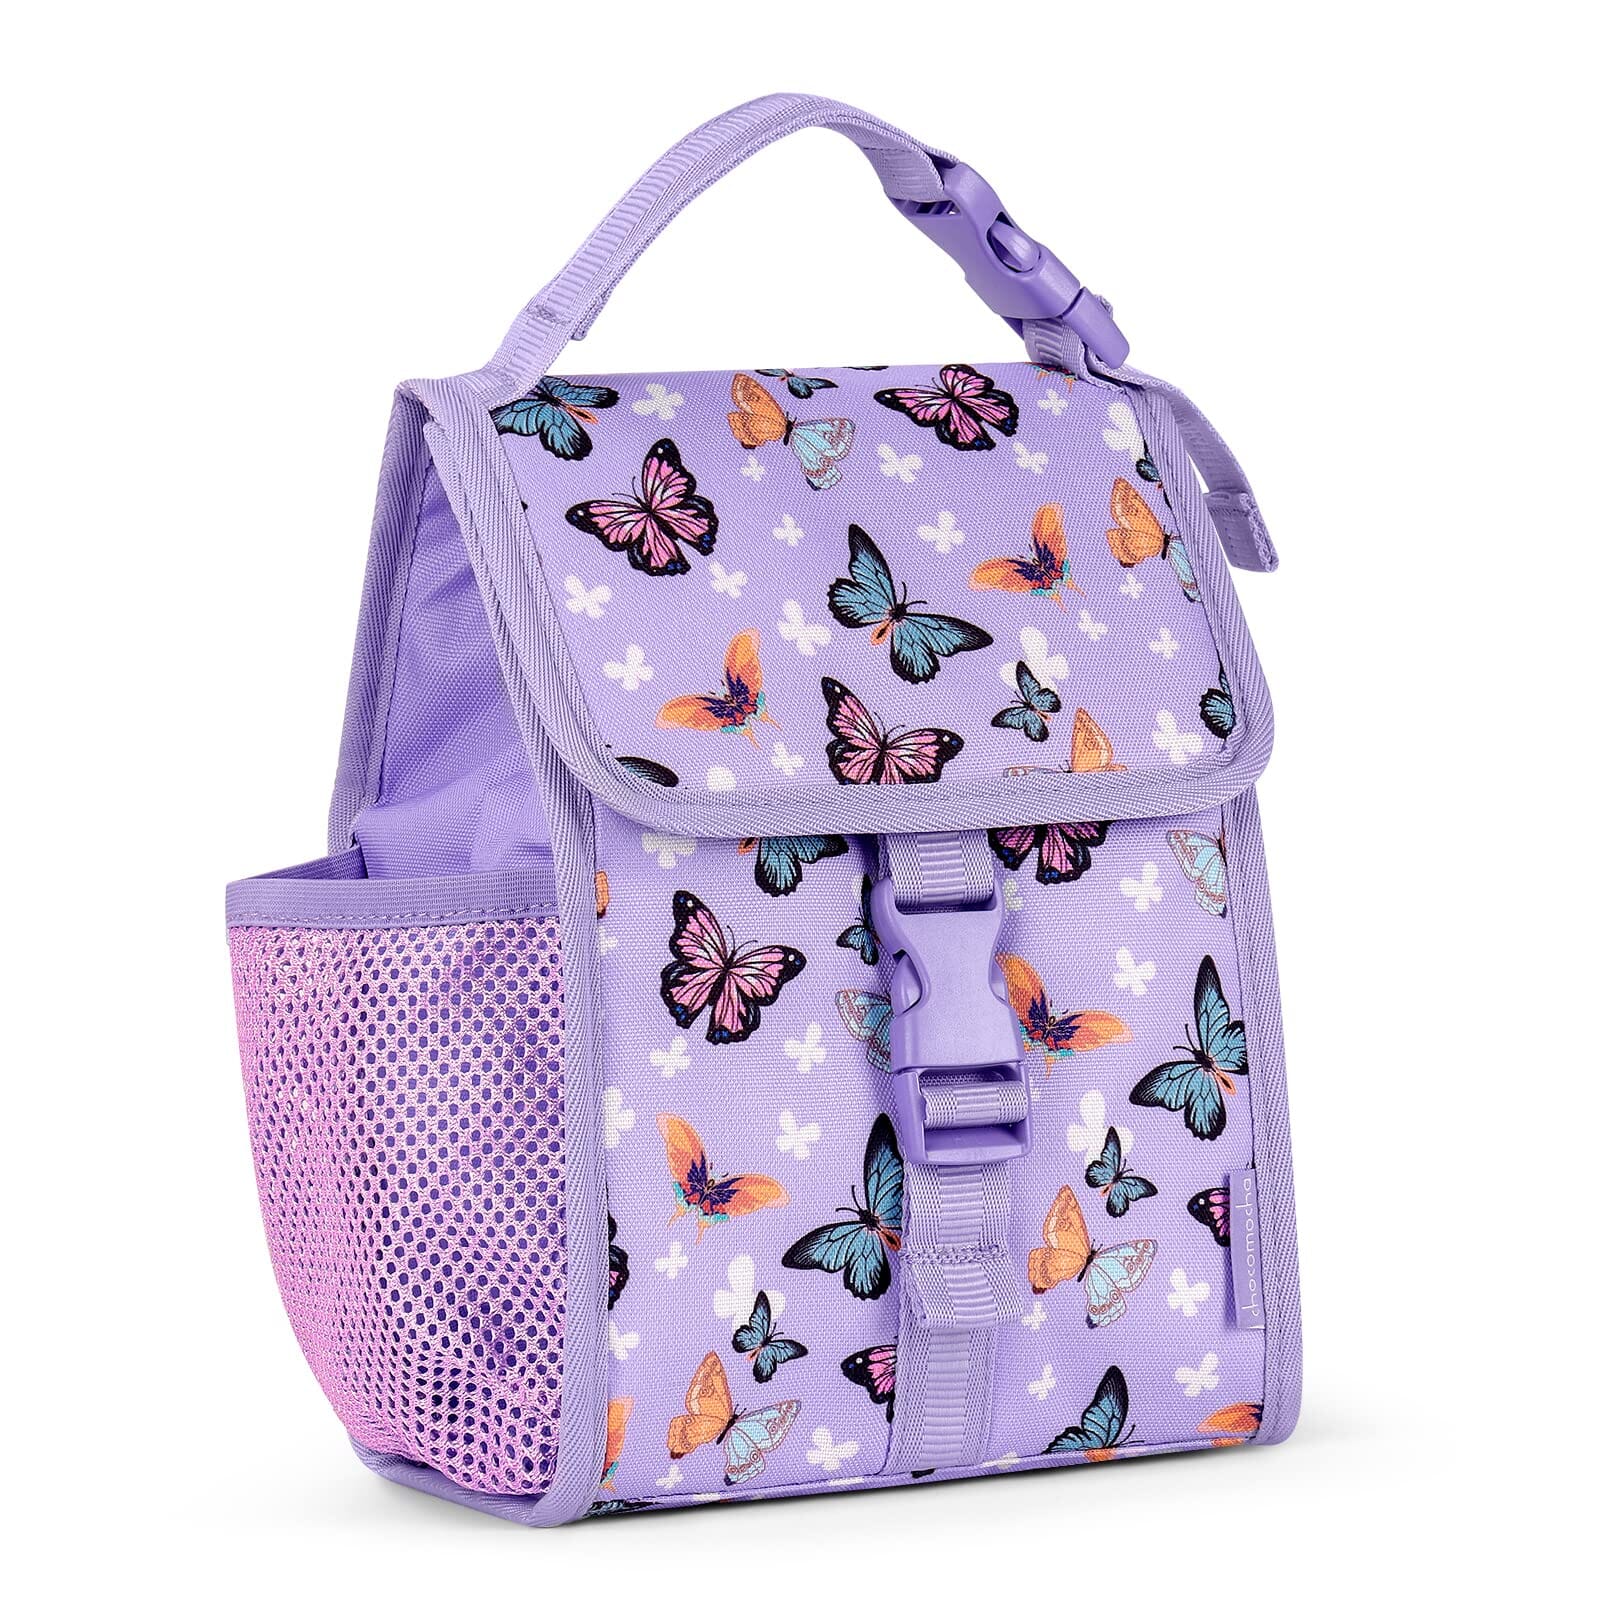 Choco Mocha Butterfly Lunch Bag for Toddler Girls Preschool Elementary Daycare, Reusable Insulated Girls Lunch Box with Water Bottle Holder for Kids Travel, Purple chocomochakids 